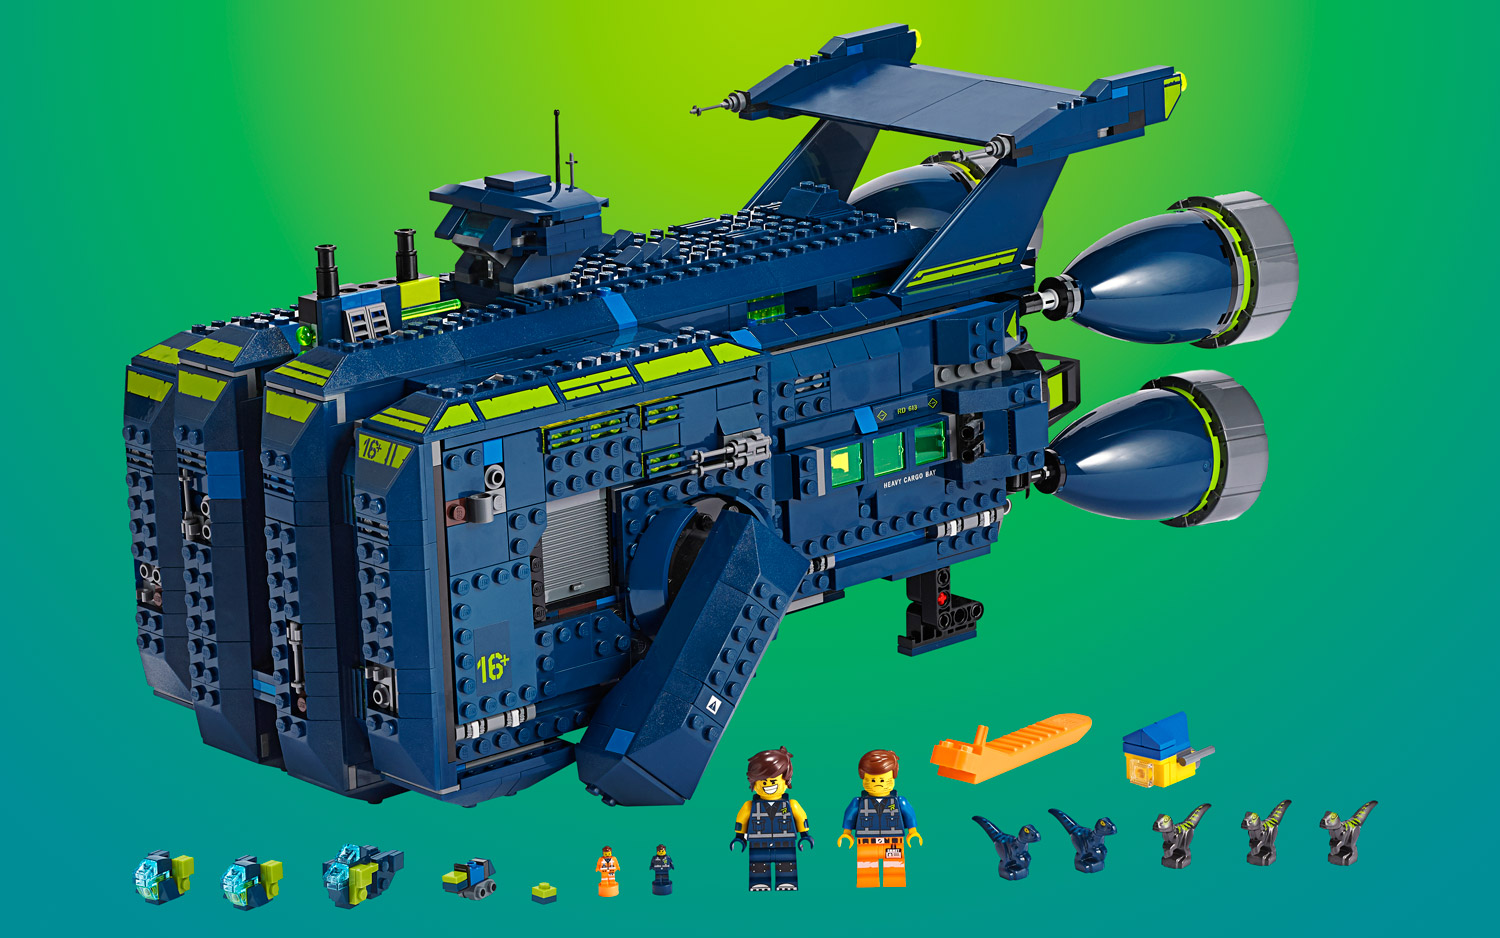 Meet the Rexcelsior Spaceship from 'The Lego Movie 2' in These Photos! |  Space